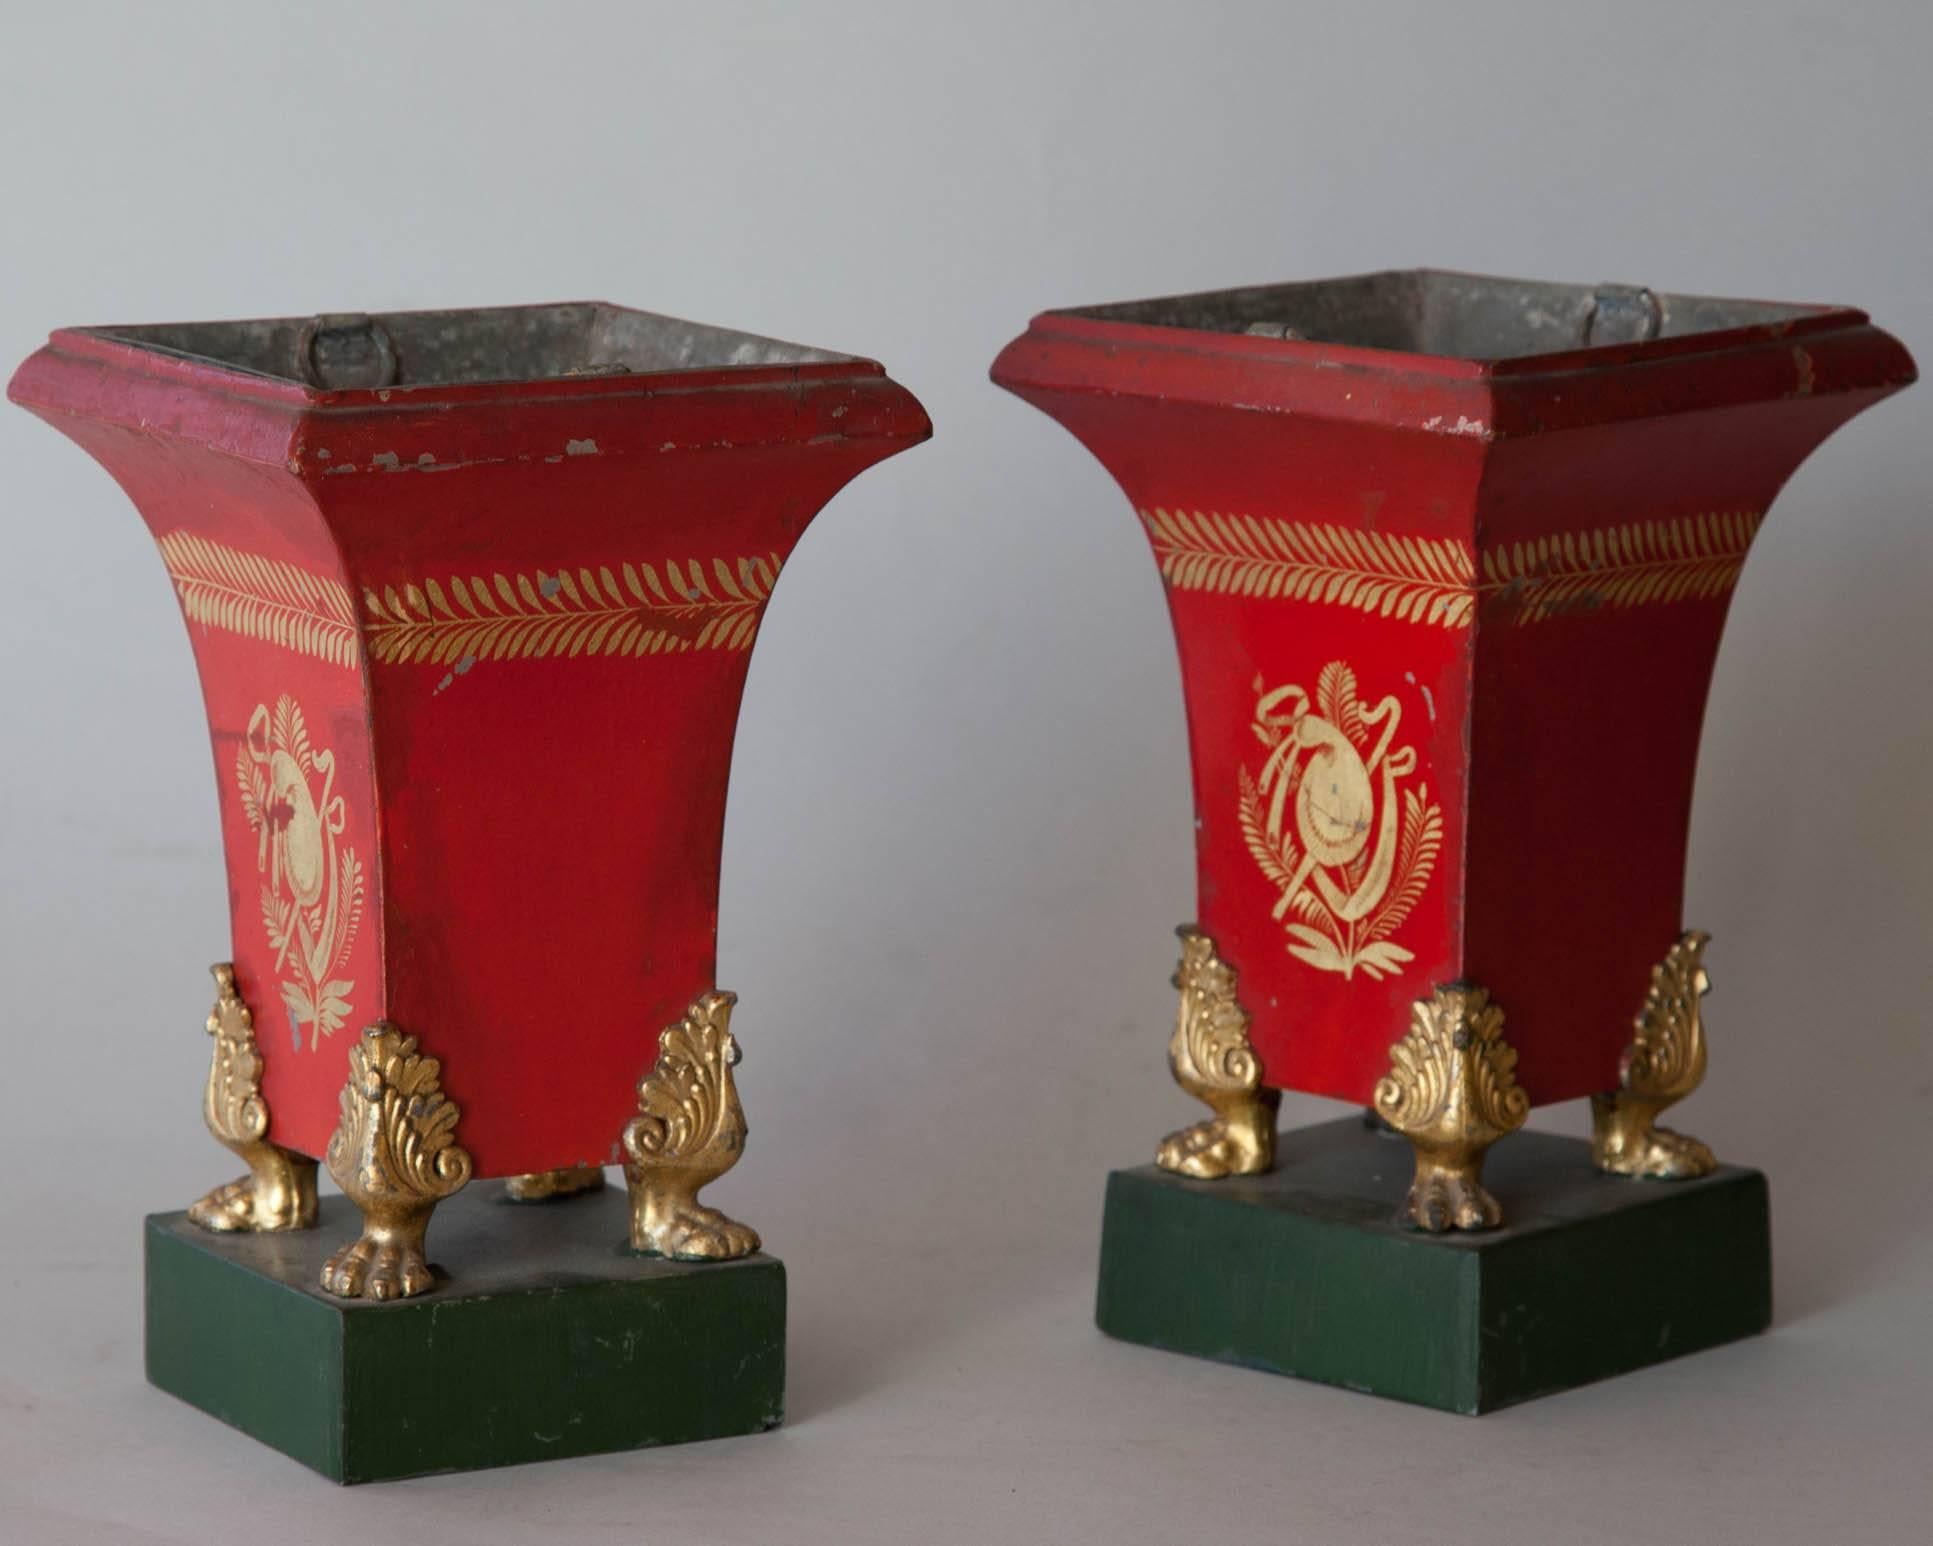 Restauration Pair of Small Early 19th Century Painted and Gilt Tole Ornamental Jardiniere For Sale